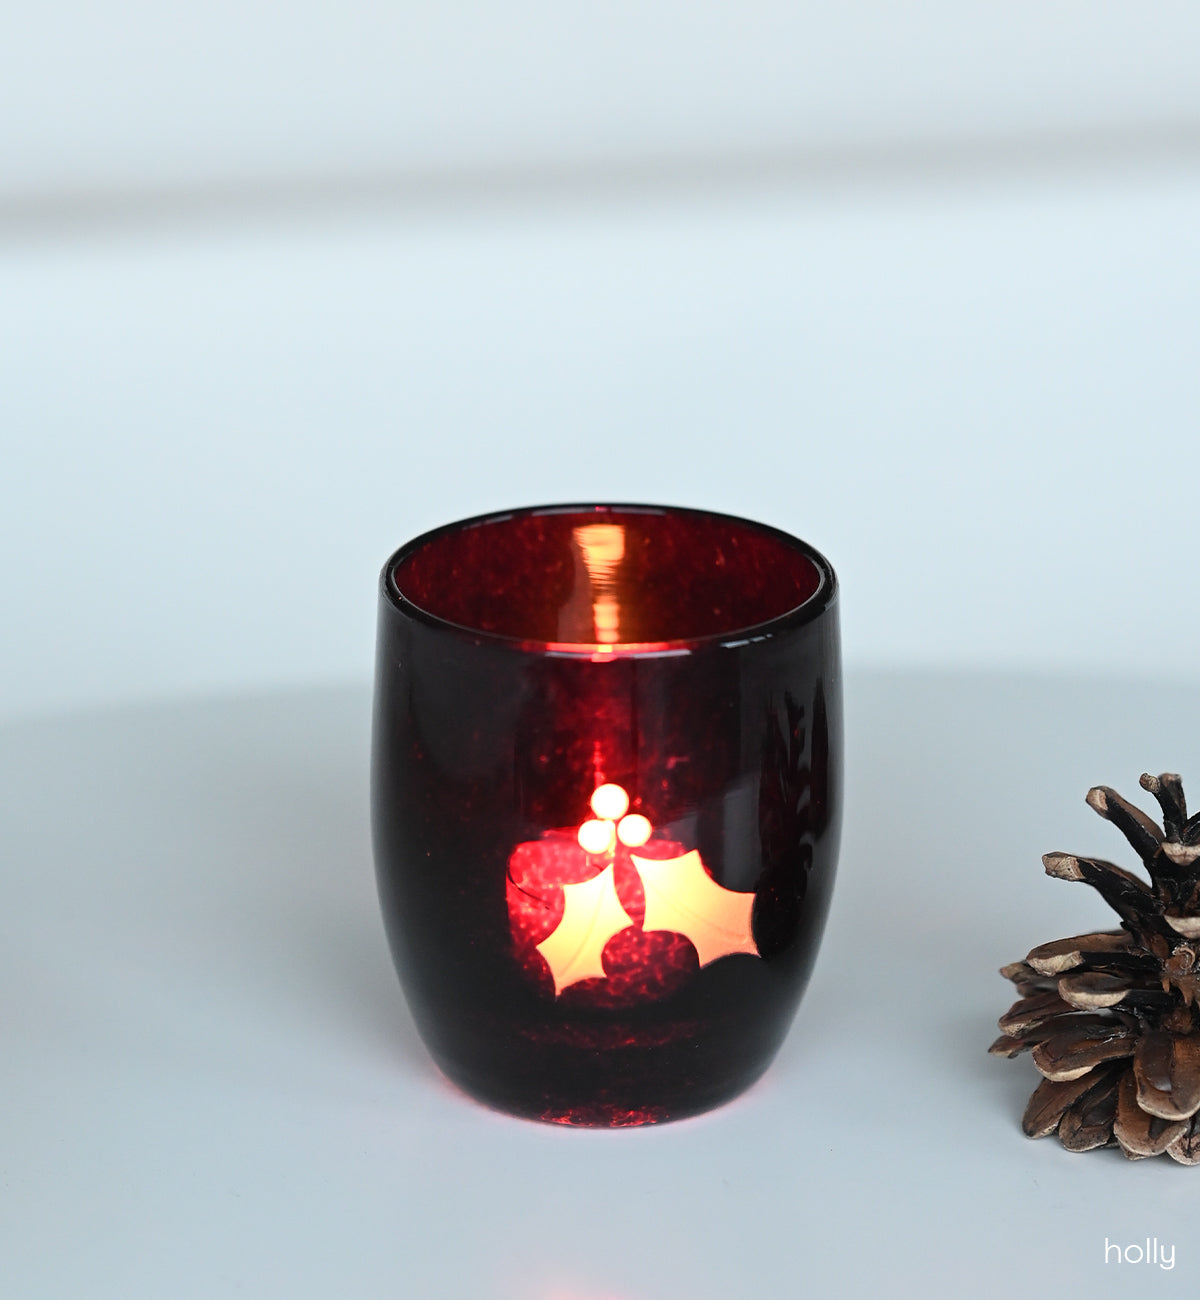 holly deep red translucent holly leaf and berry etching hand-blown glass votive candle holders